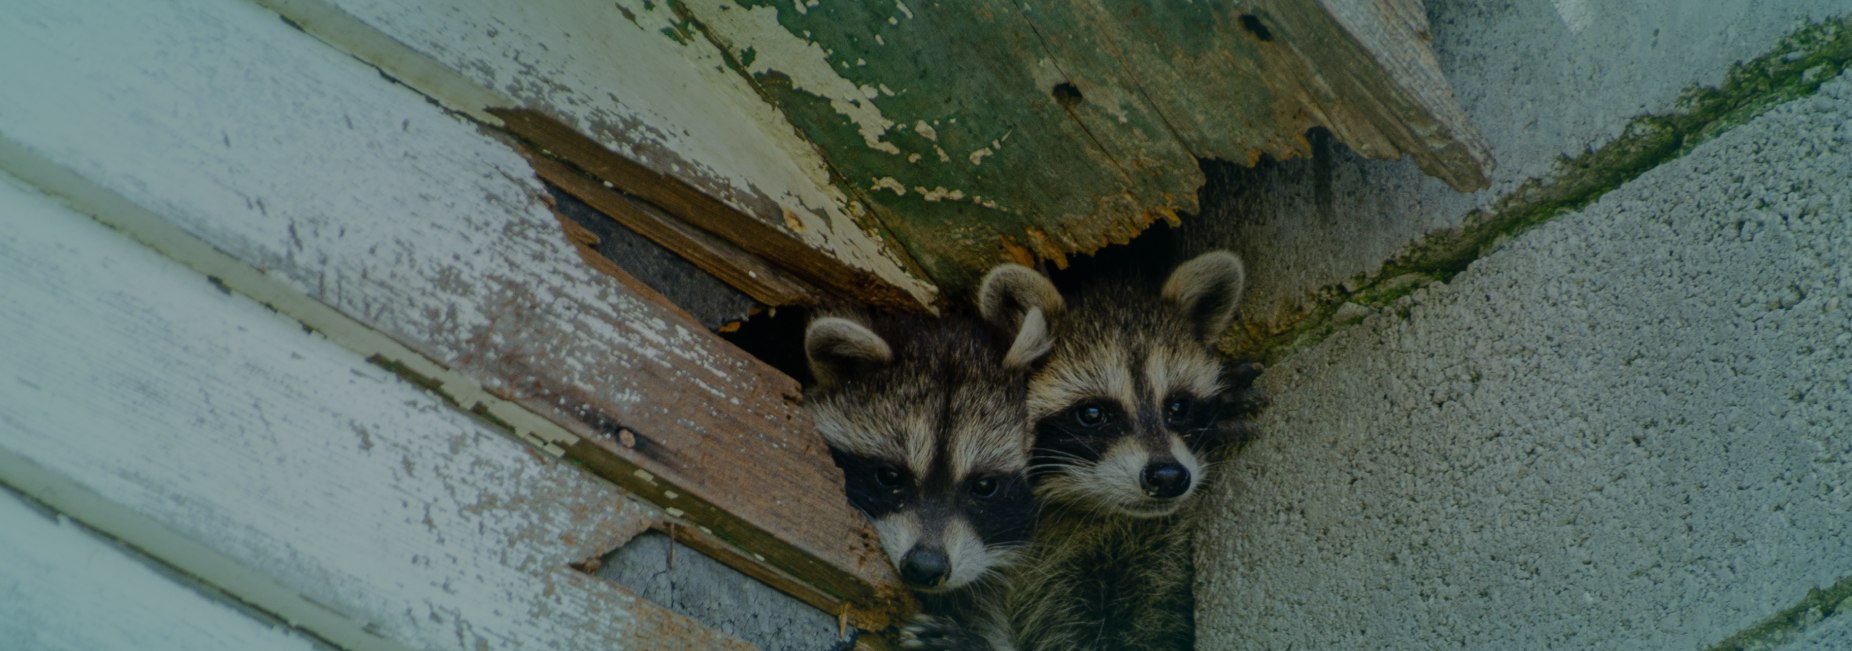 baby raccoons climb out of hole old building surfside beach sc